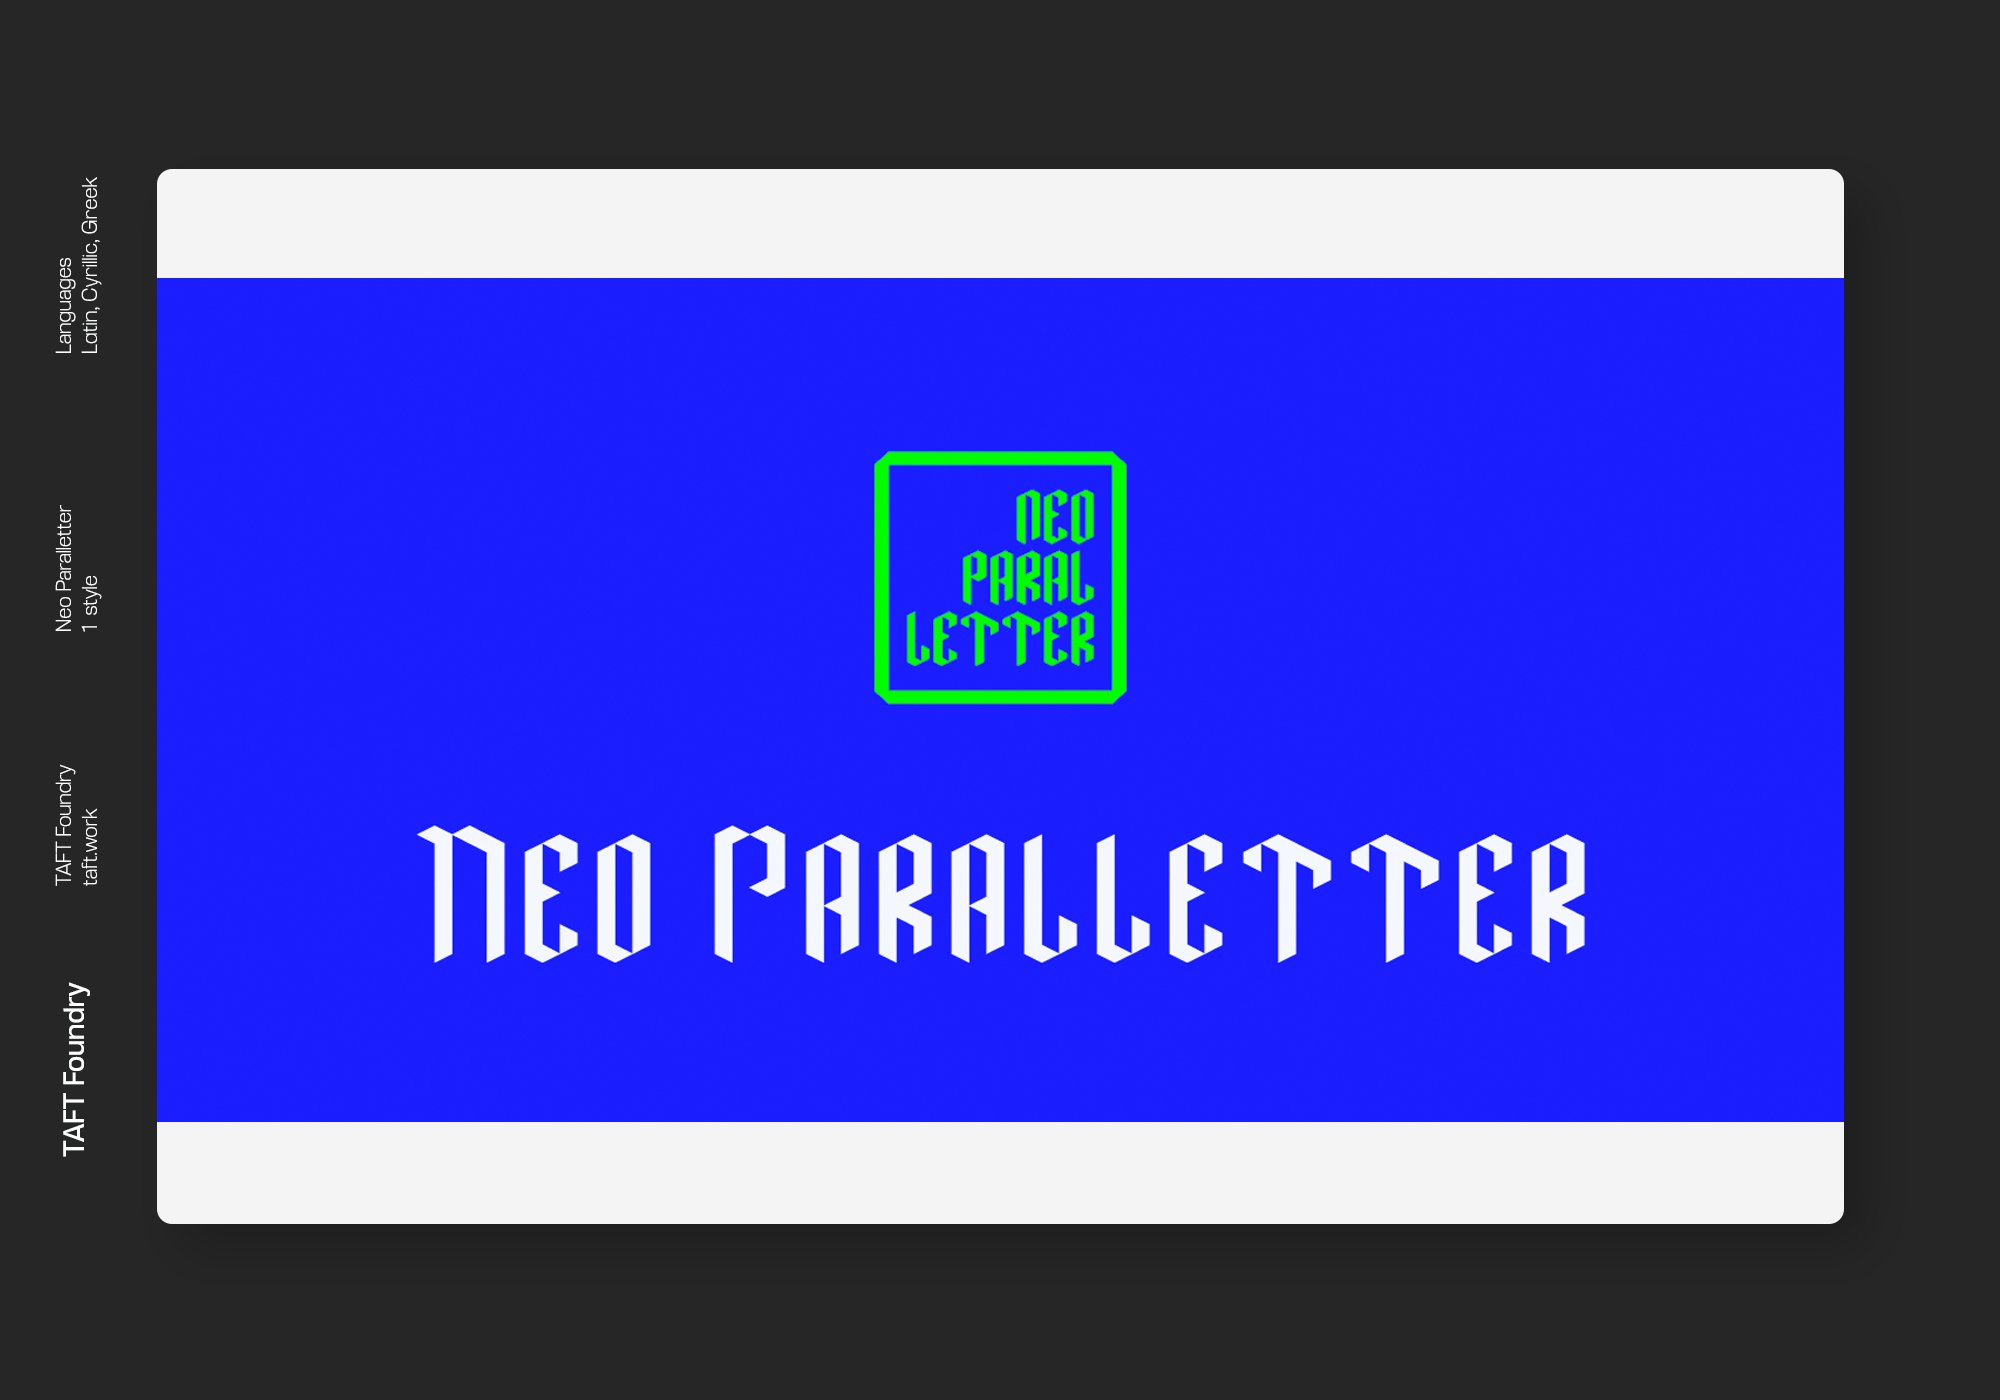 Neo Paralletter cover image.